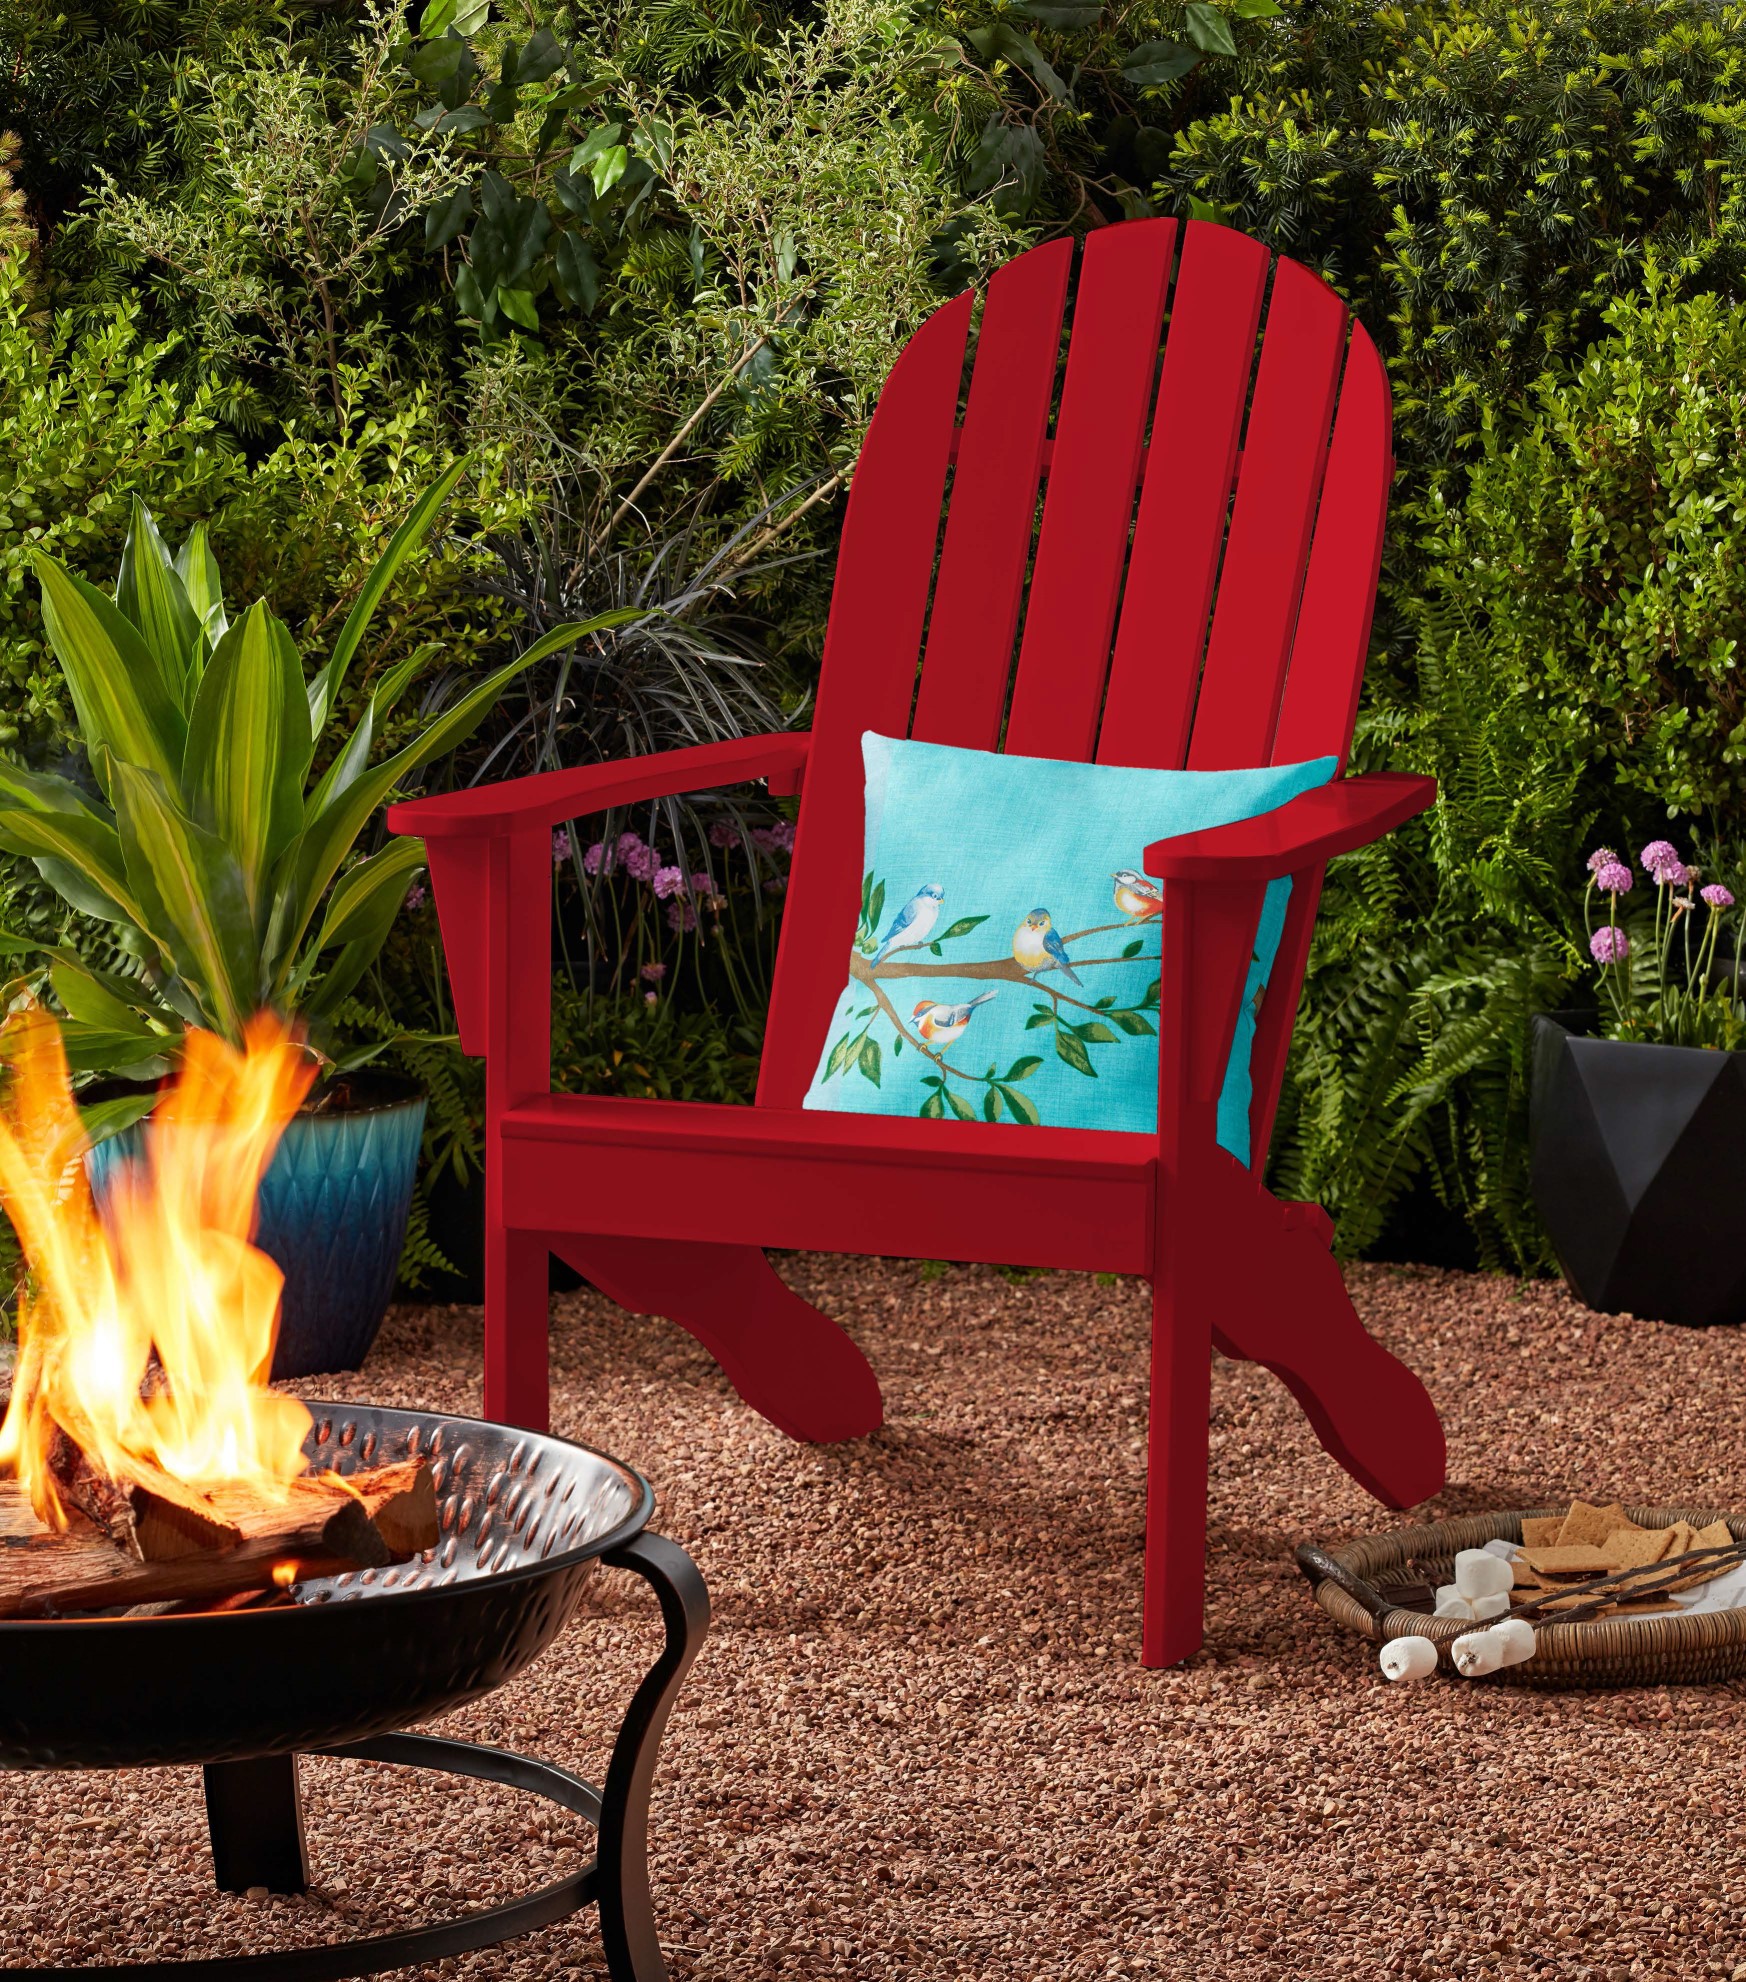 Mainstays Wood Outdoor Adirondack Chair, Red Color - image 1 of 8